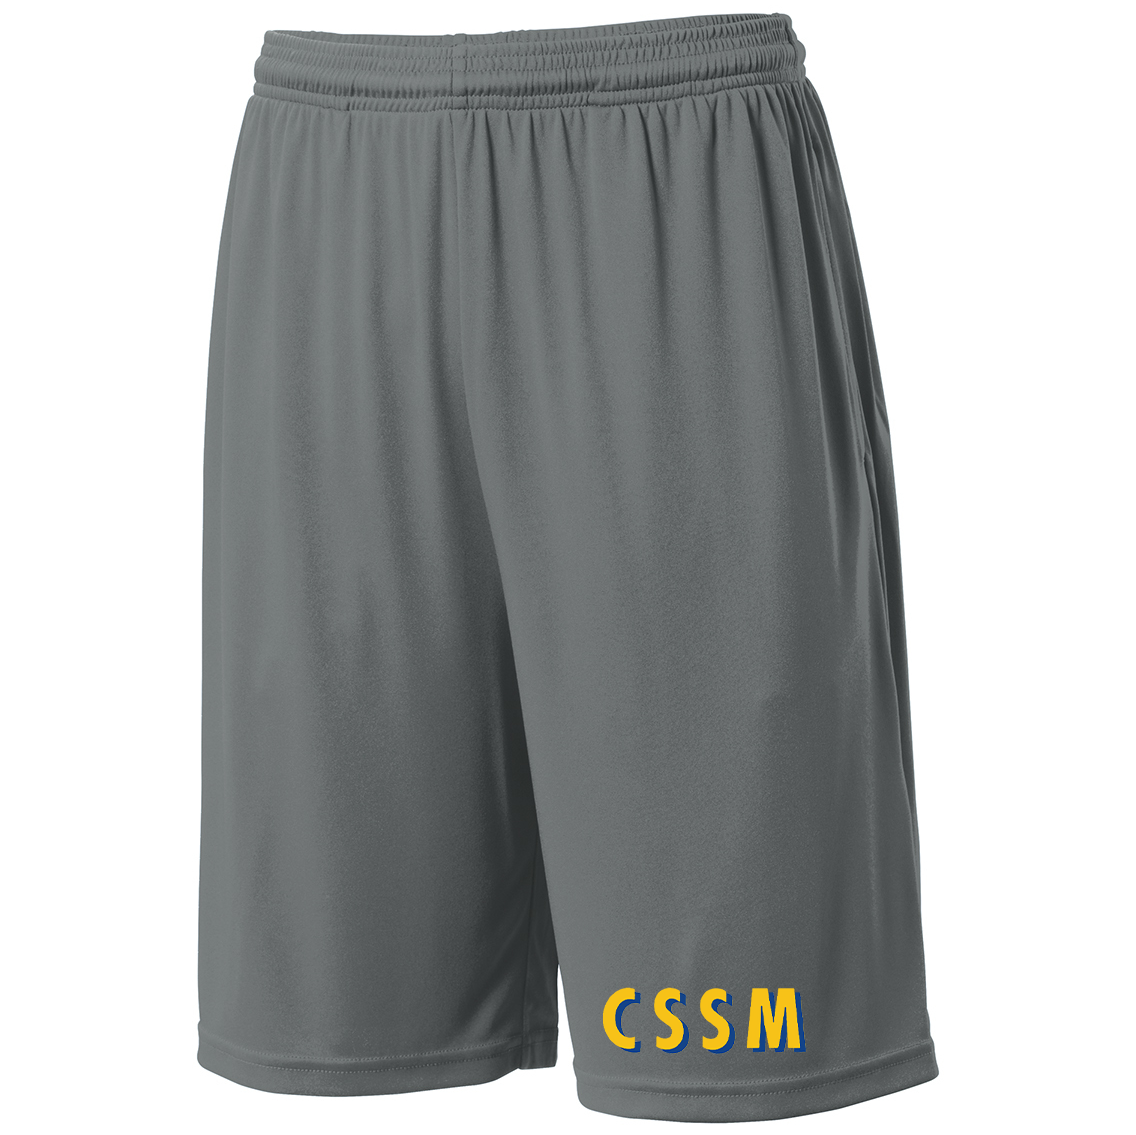 Cleveland School of Science and Medicine Shorts